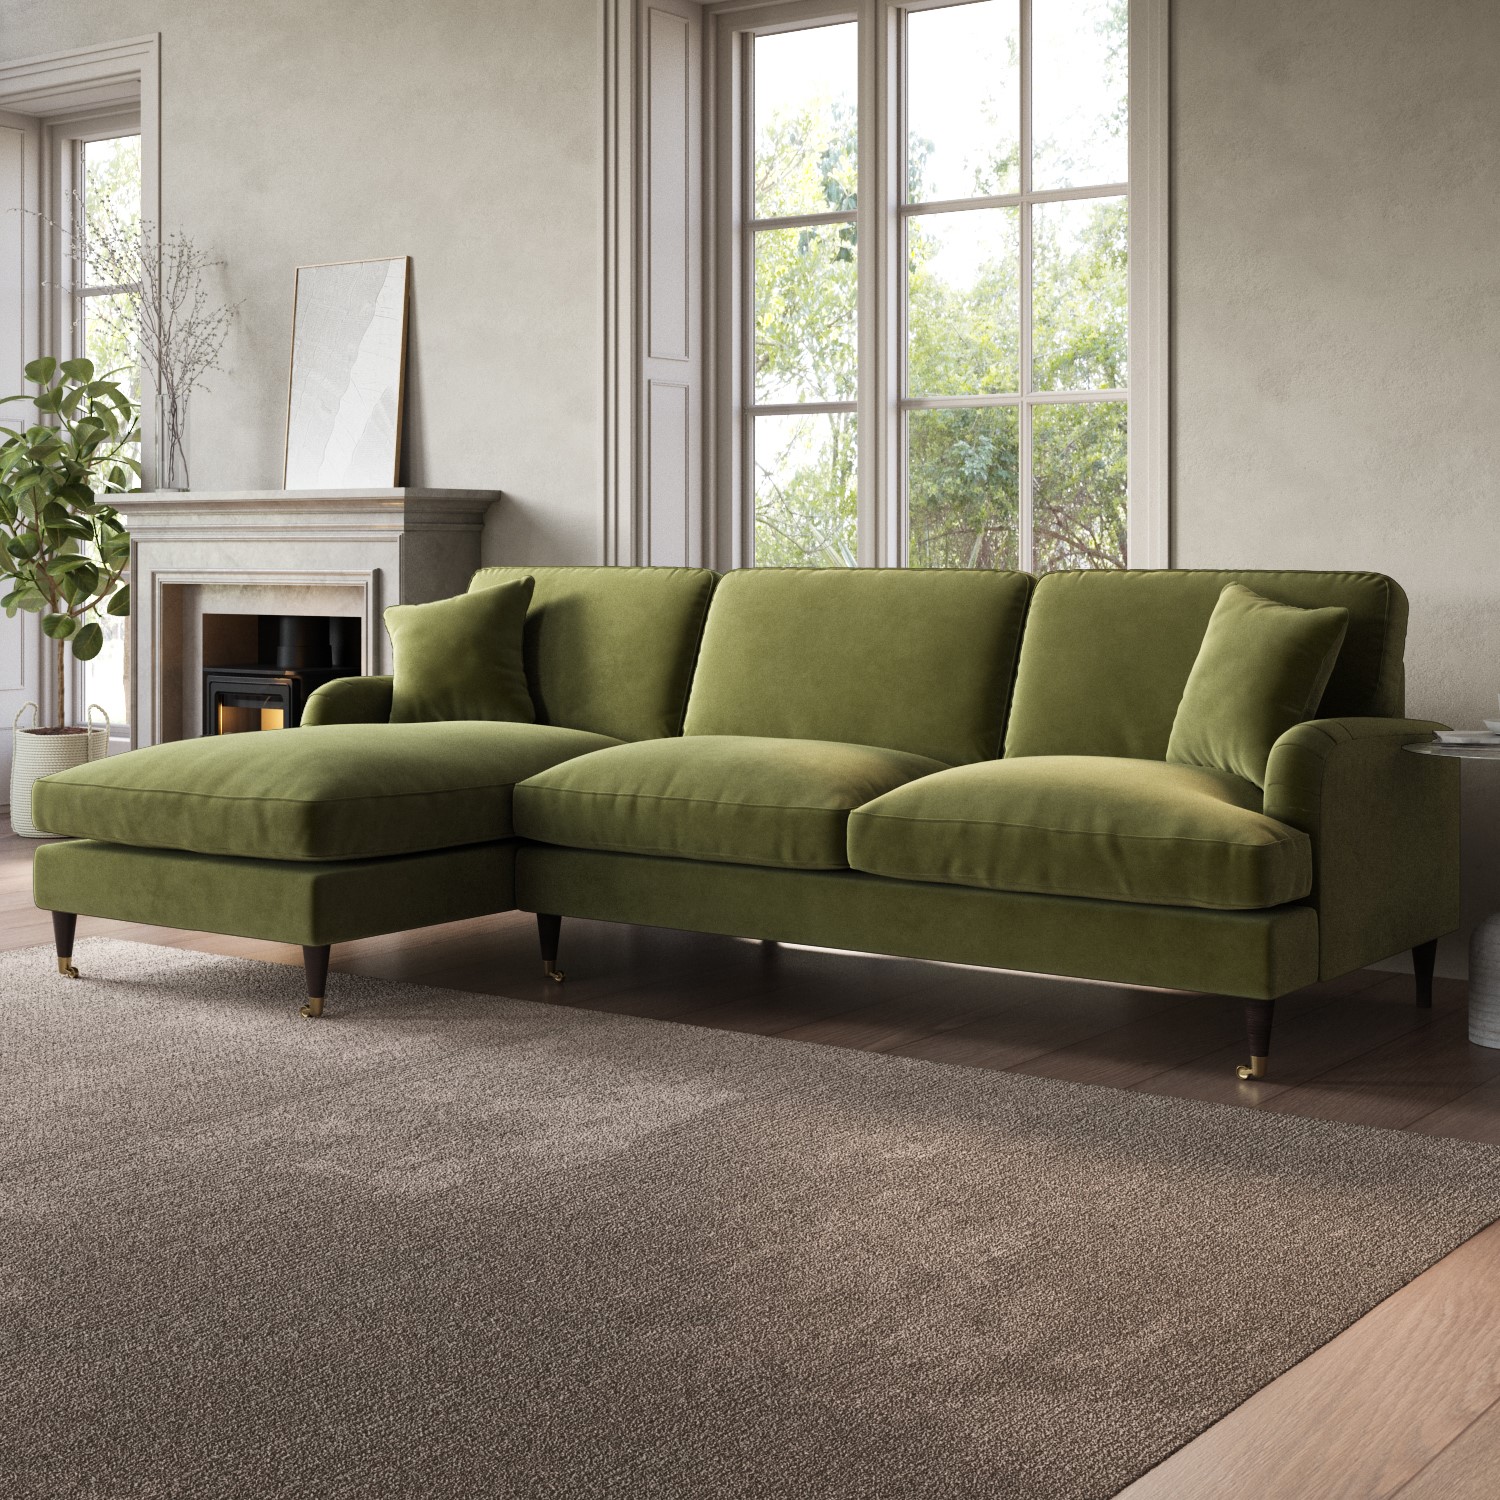 Read more about Olive green velvet left hand facing l shaped sofa seats 4 payton